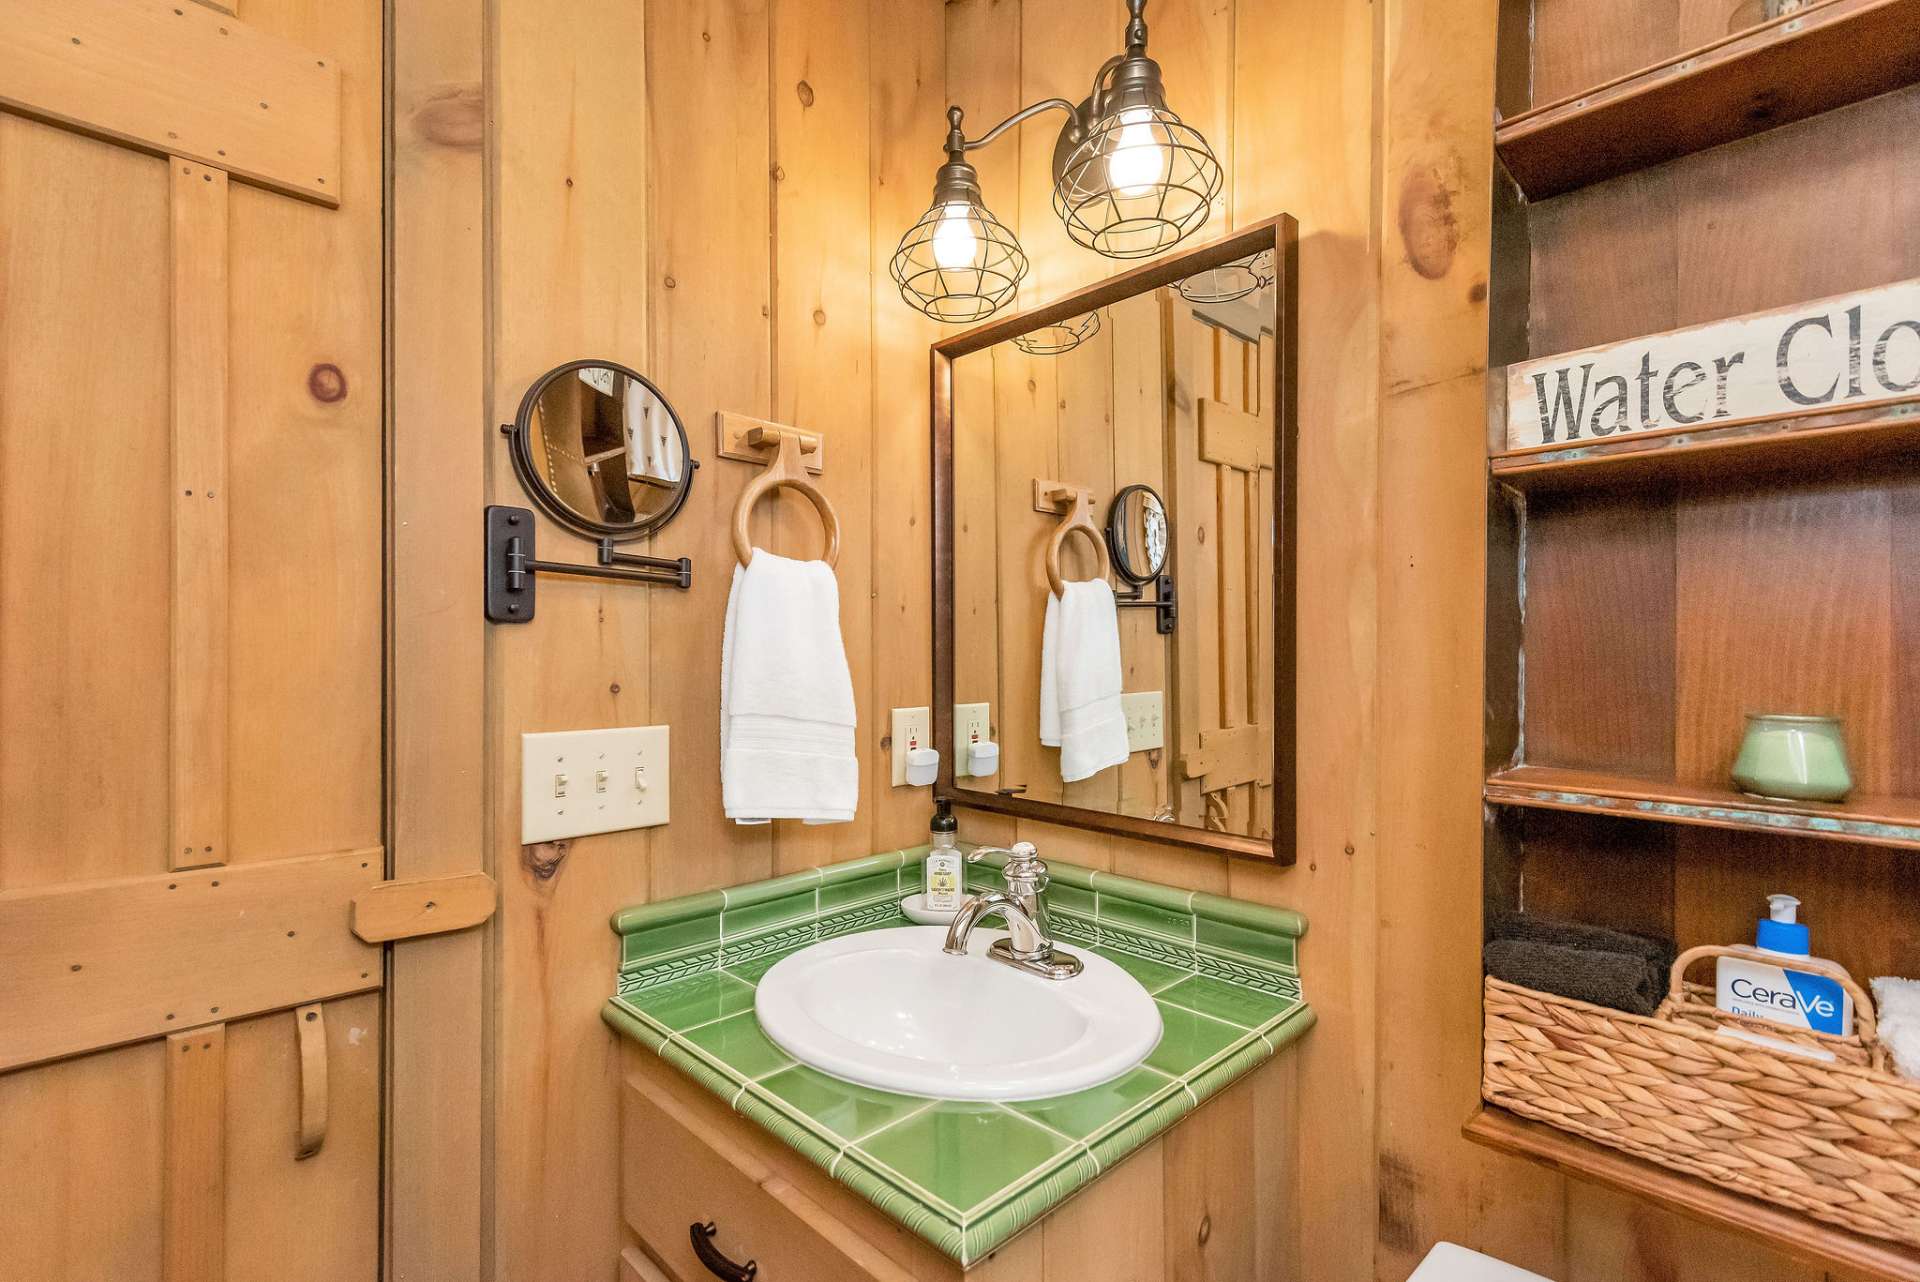 Unique green tile sinks and modern lighting carry continuity throughout the home's baths.